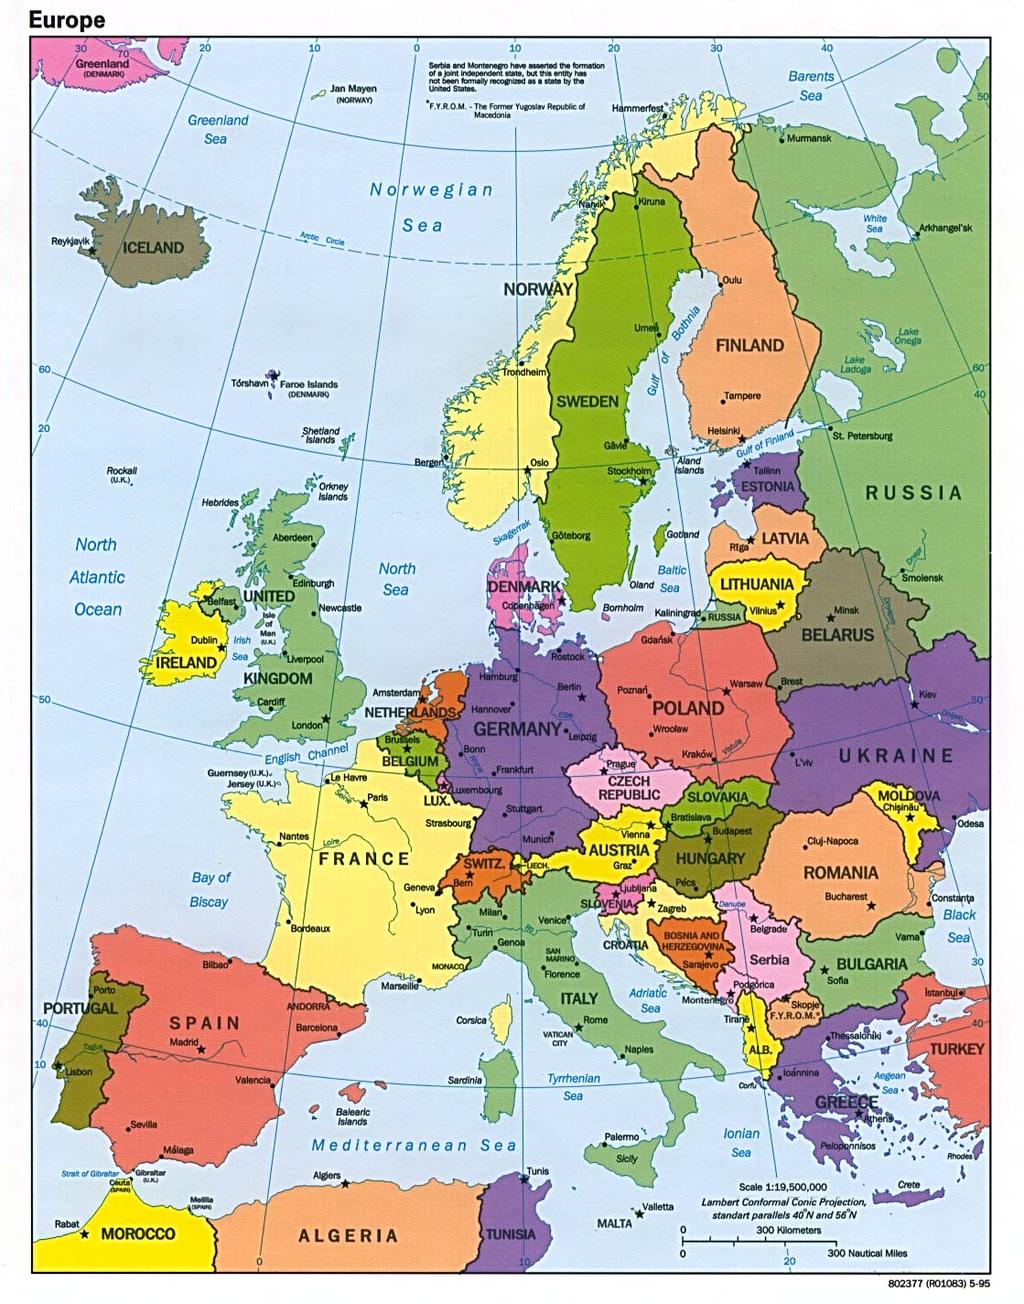 Europe Approx 50 countries Population (2005) 731 million 1/9 world 87 distinct "peoples of Europe", of which 33 form majority